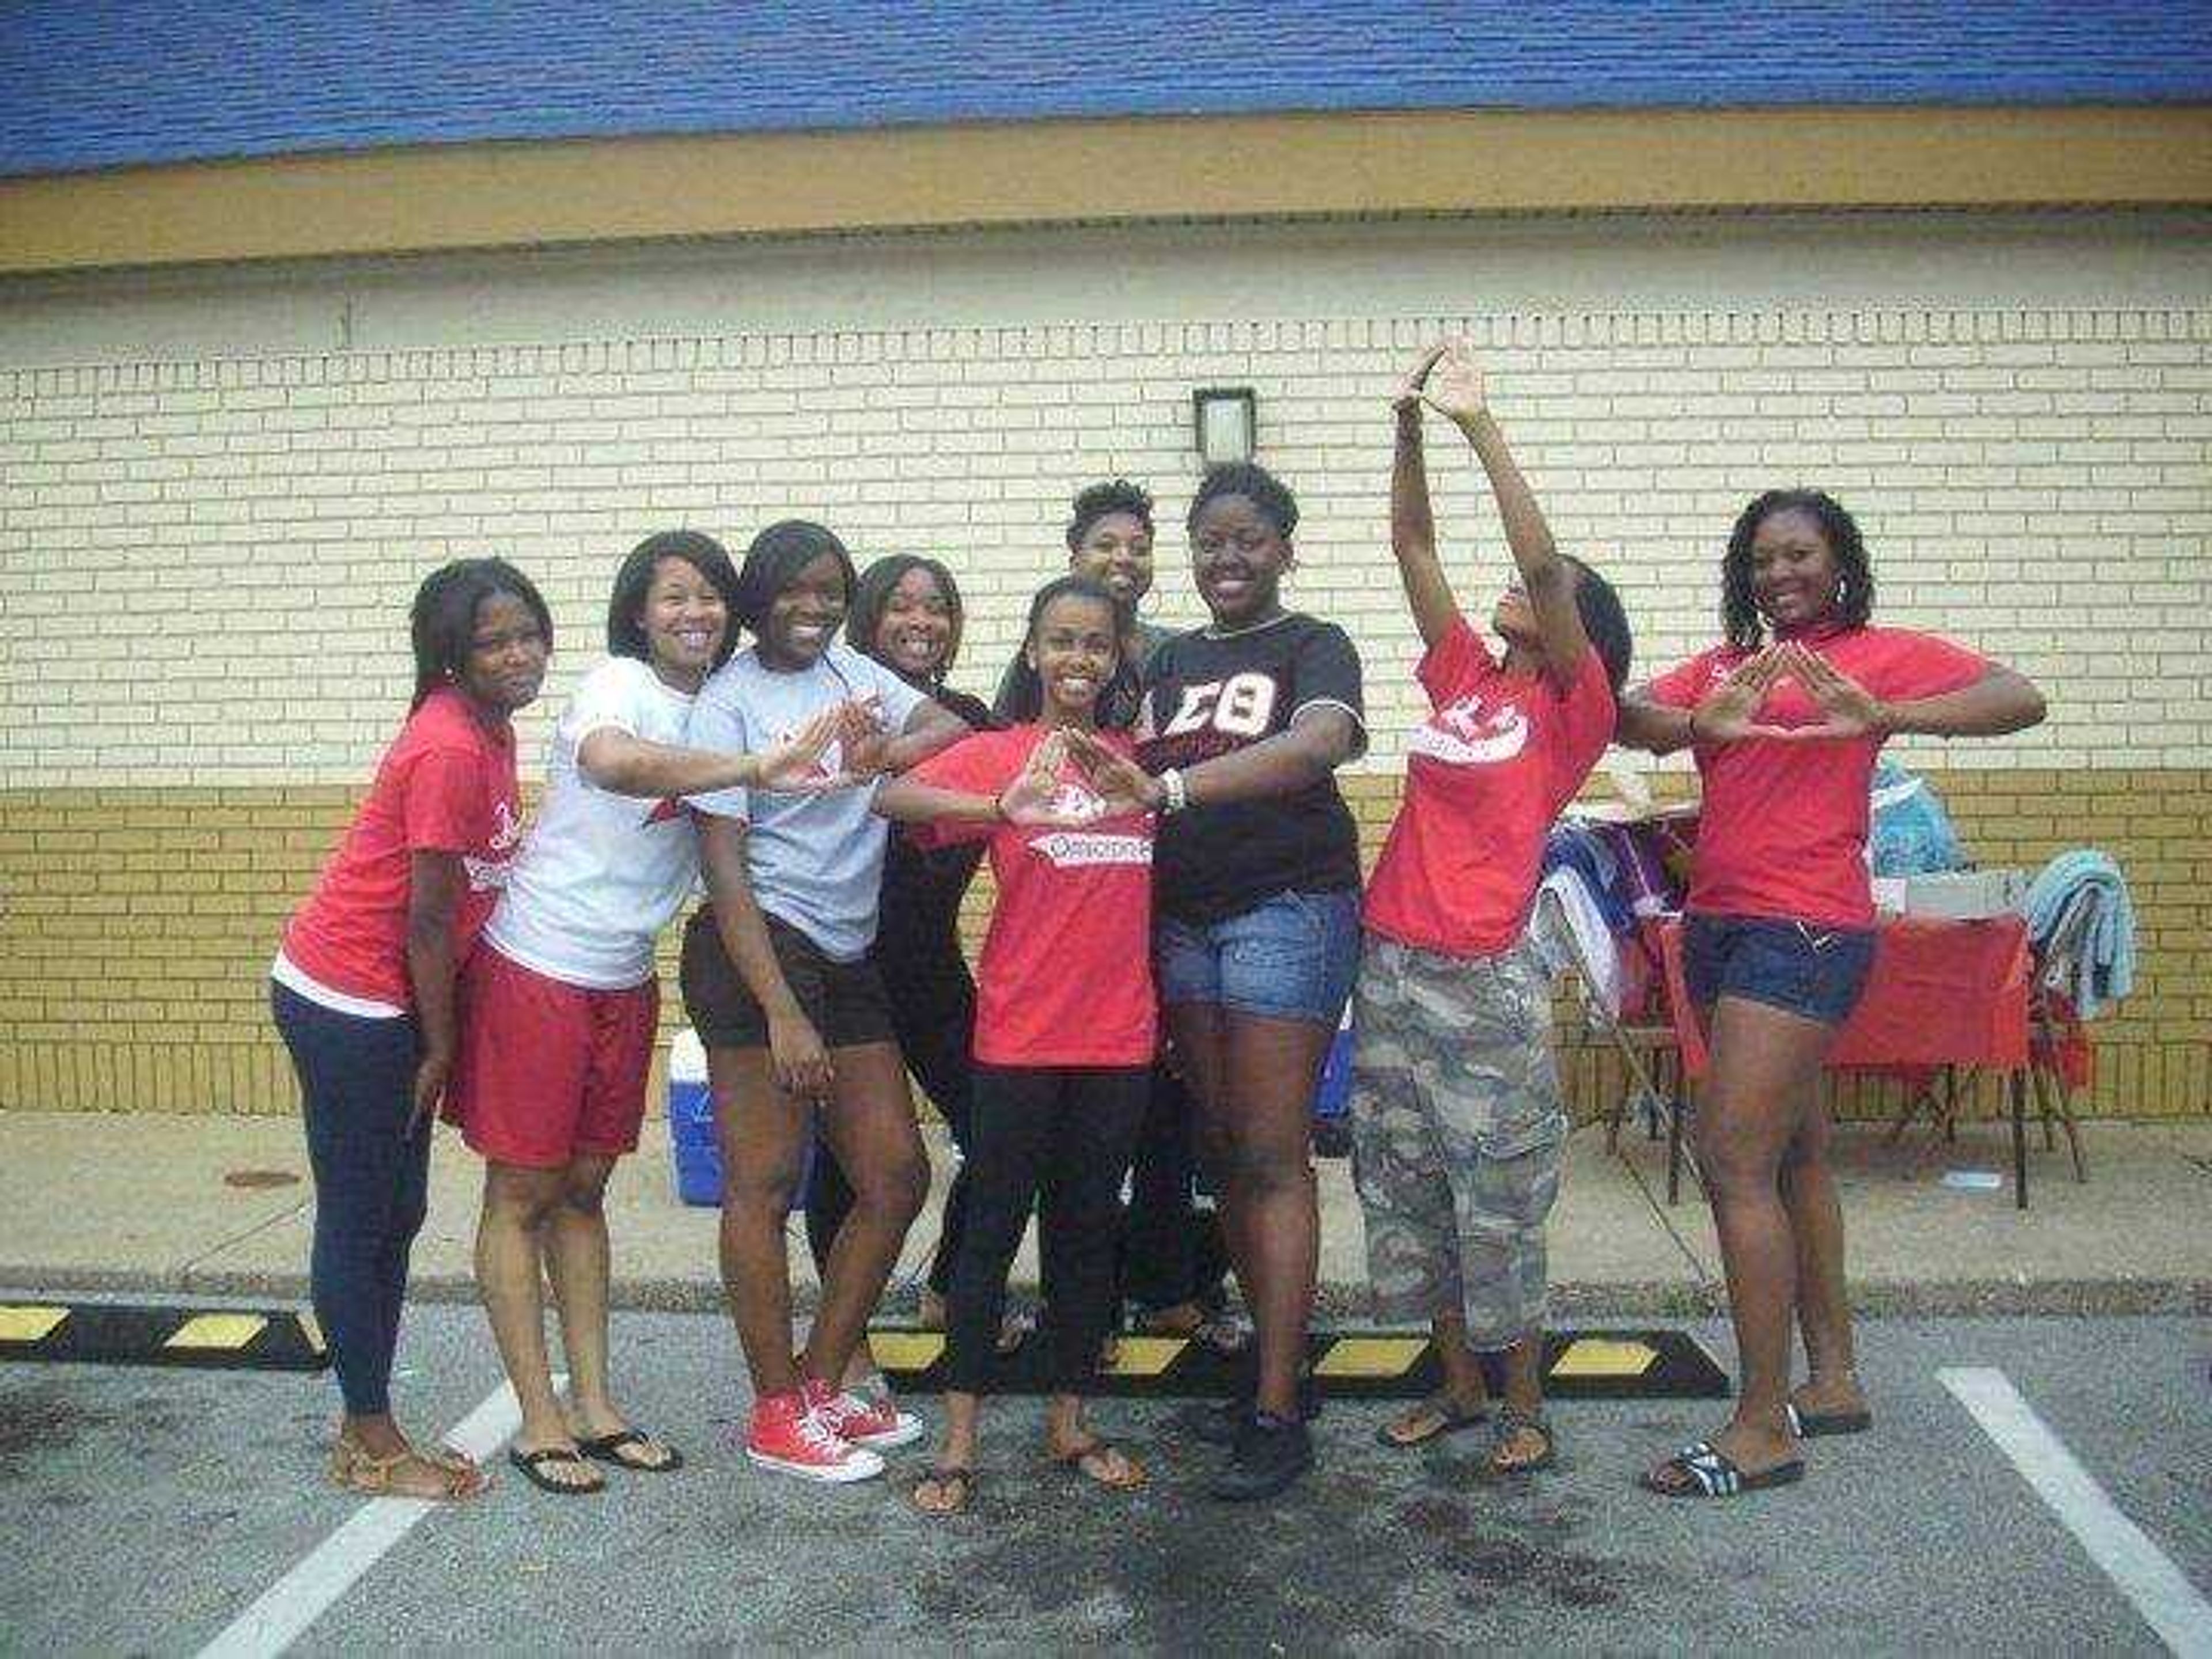 Bottom Right: Members of the Omicron Pi chapter of  Delta Sigma Theta at an event. - Submitted photo